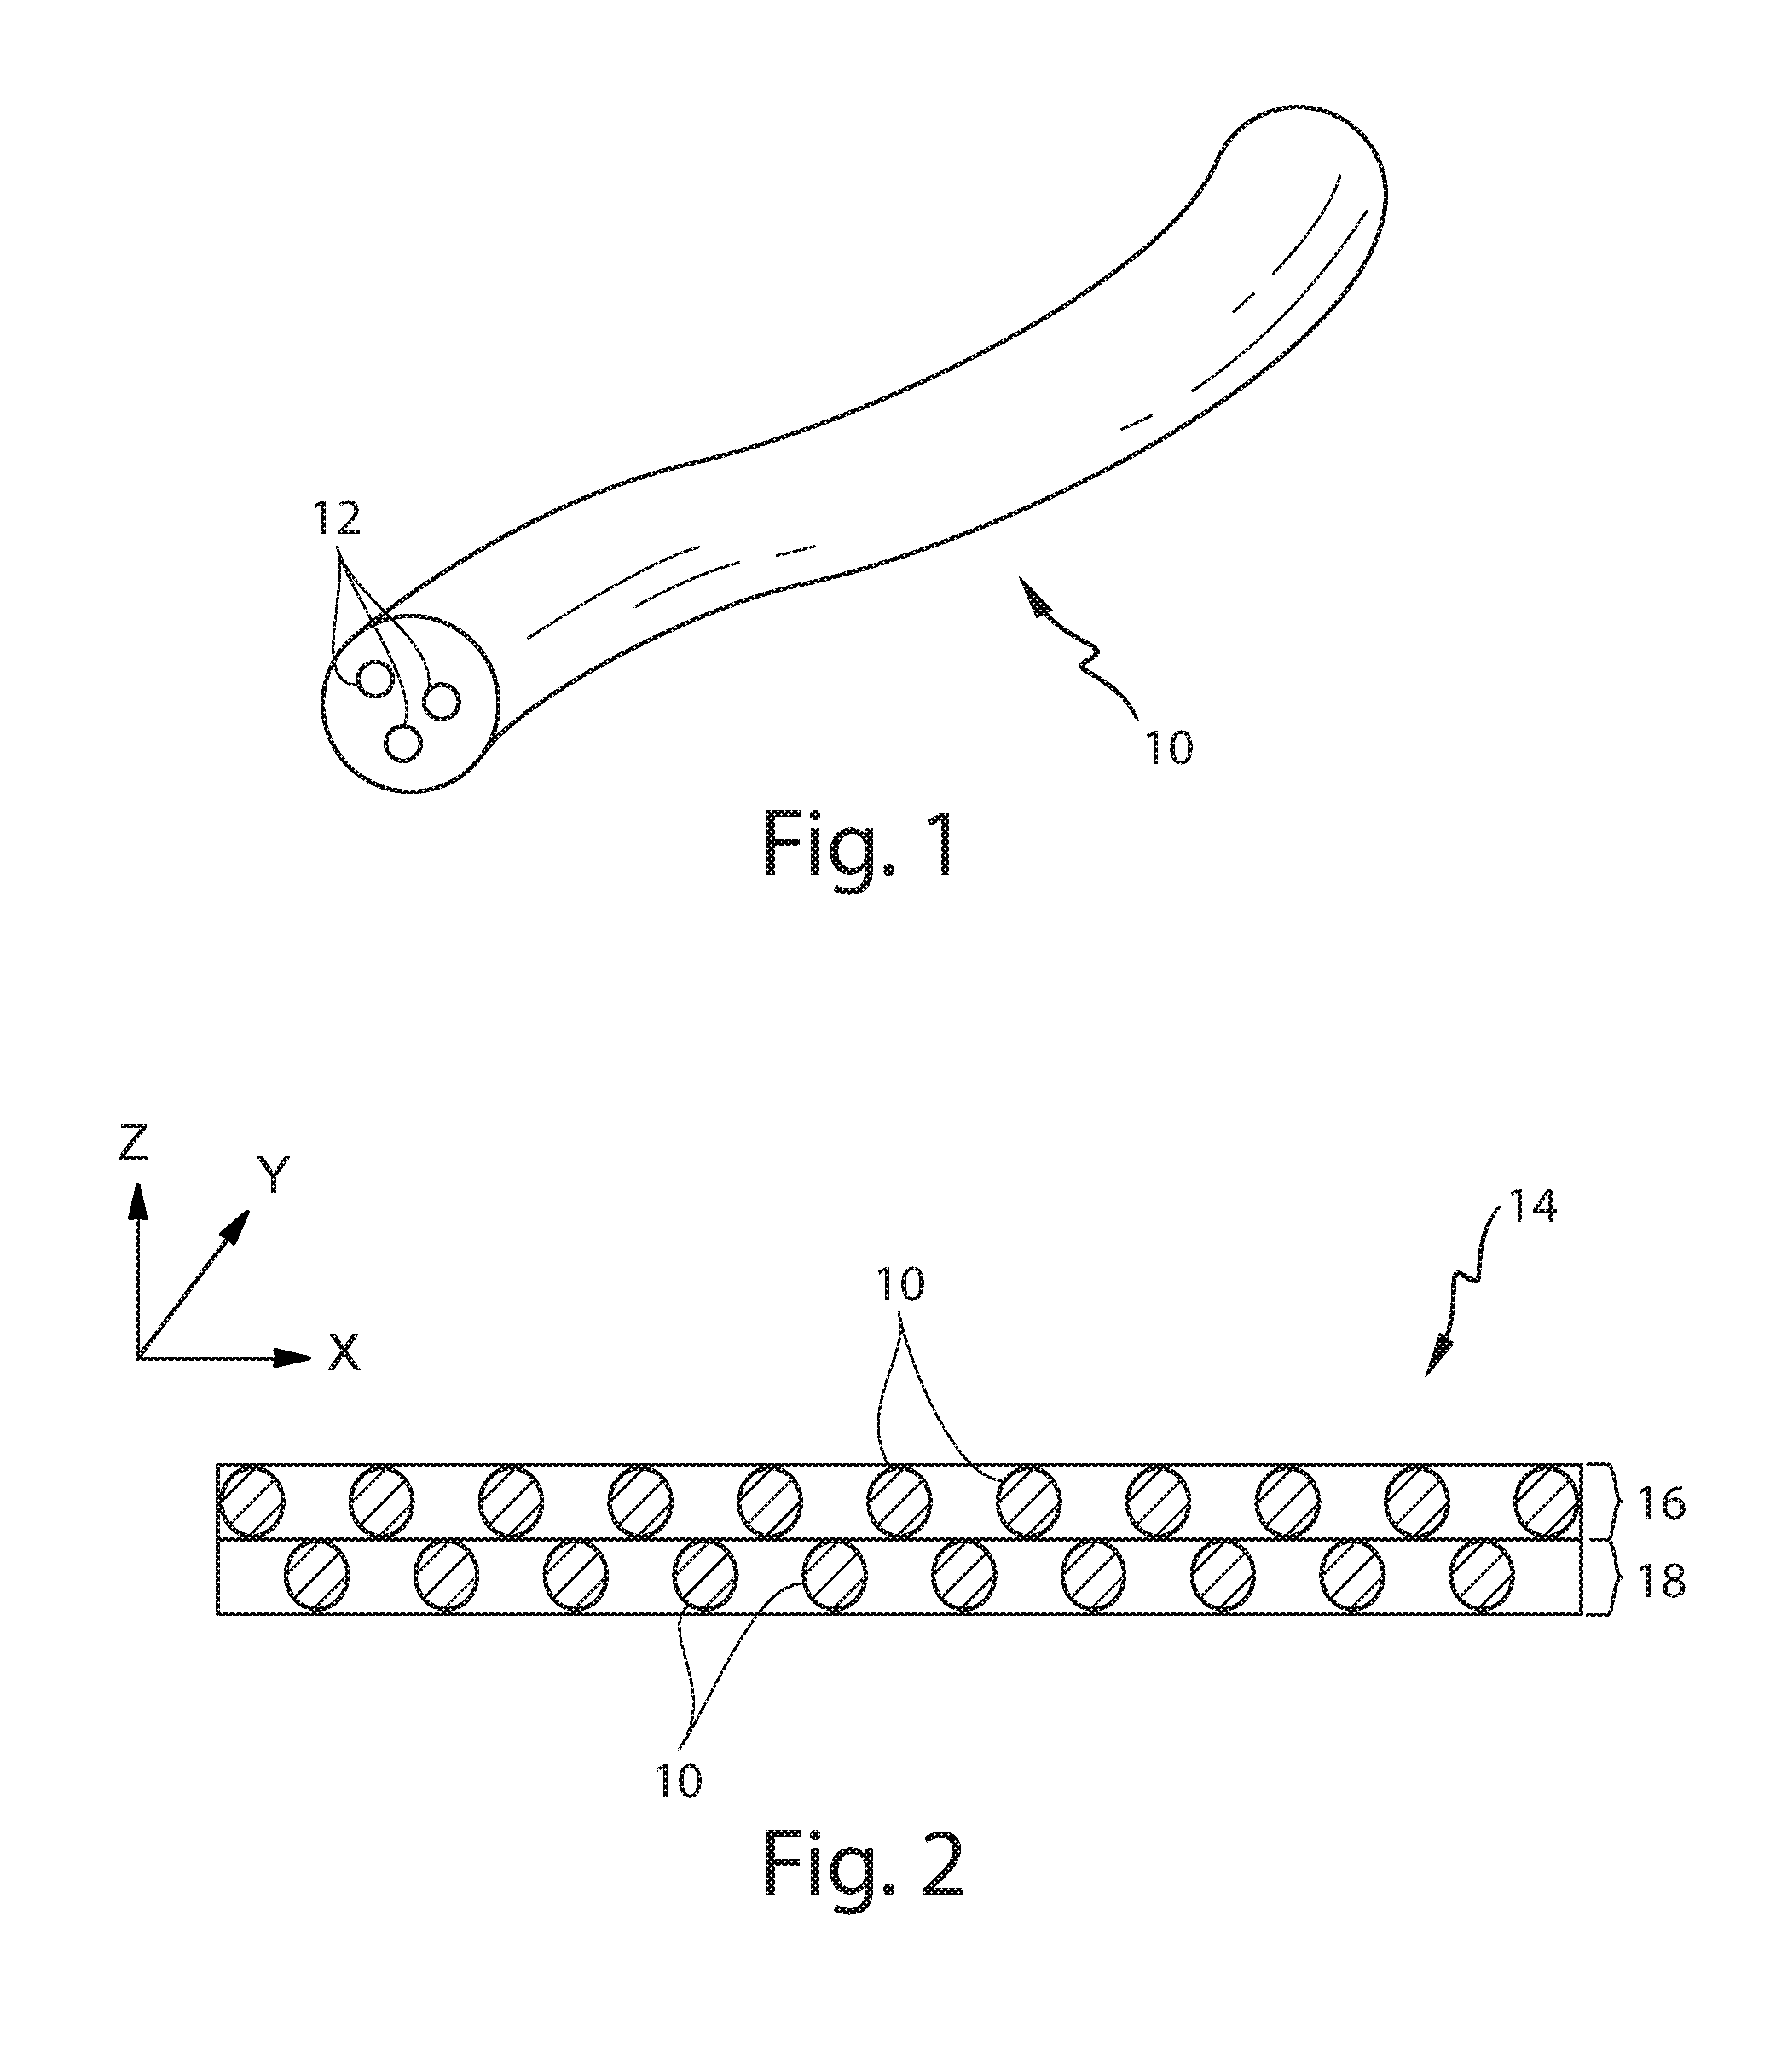 Apertured Fibrous Structures and Methods for Making Same